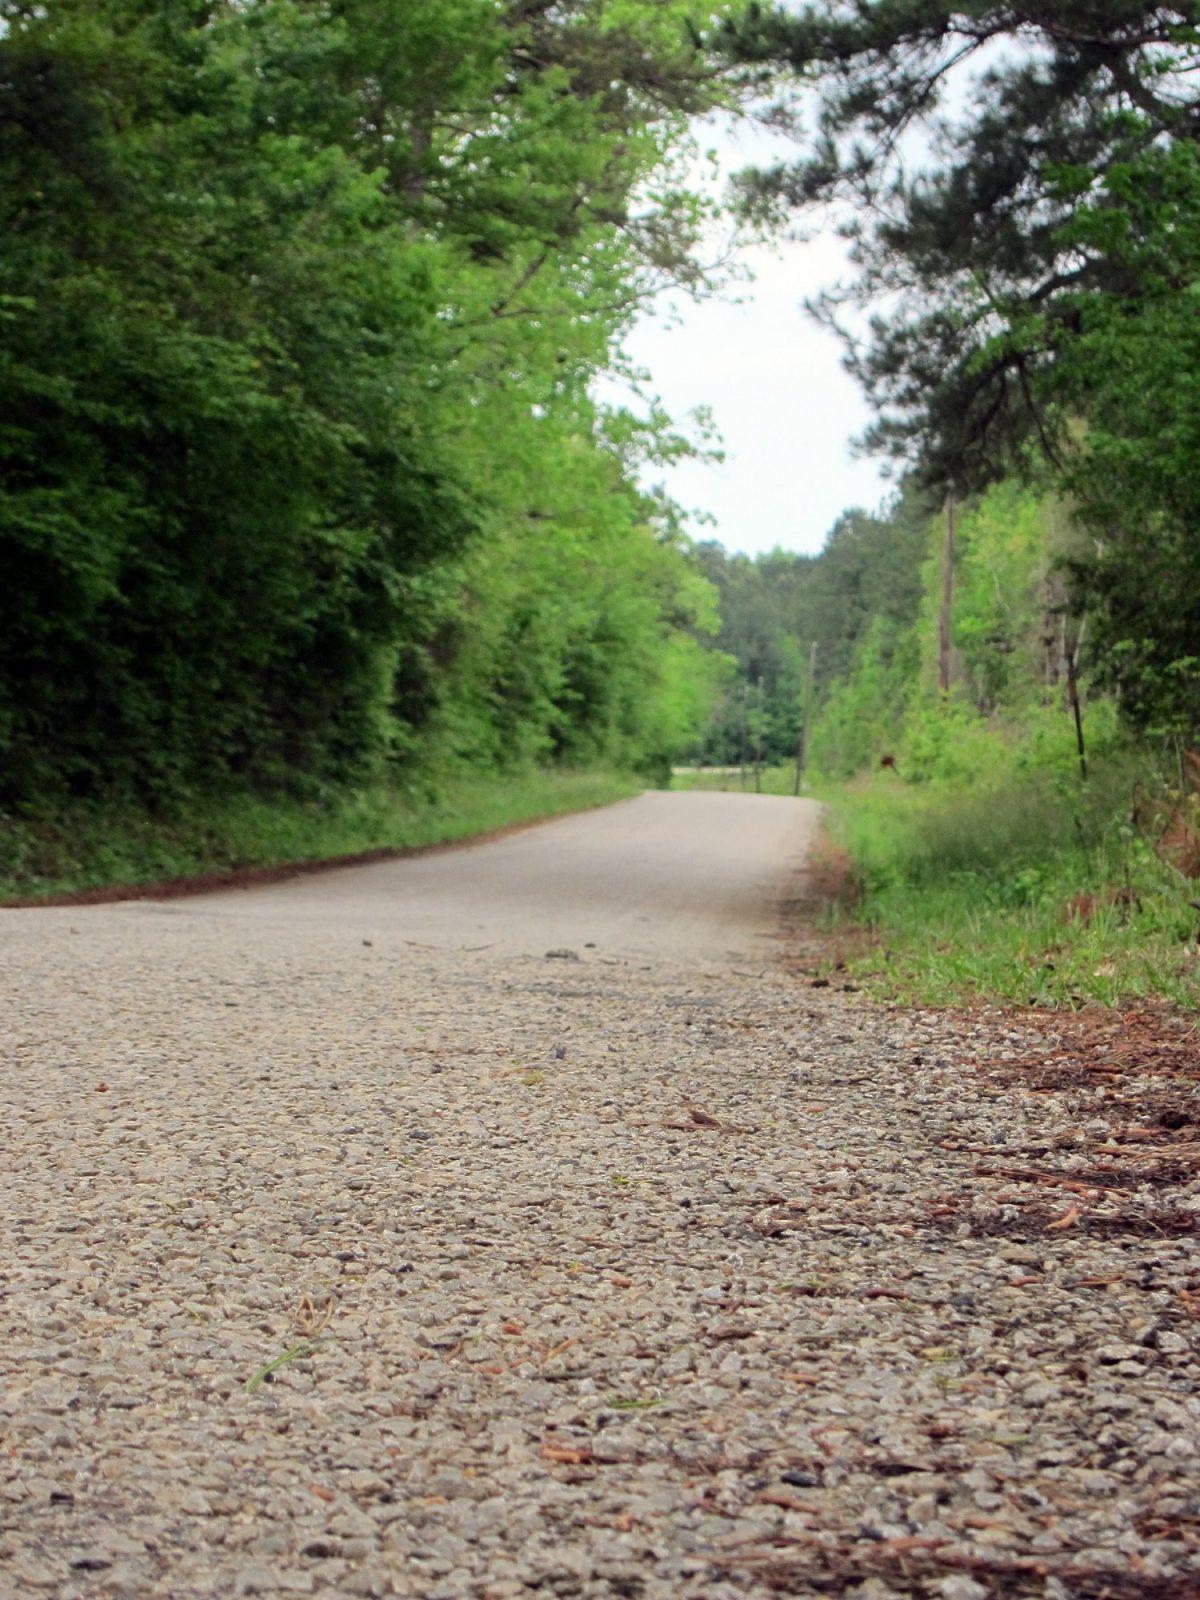 A section of Huff Creek Road, where James Byrd Jr. was dragged to death by three white men in Jasper, Texas, photo taken on April 12, 2019. (Juan Lozano/AP)